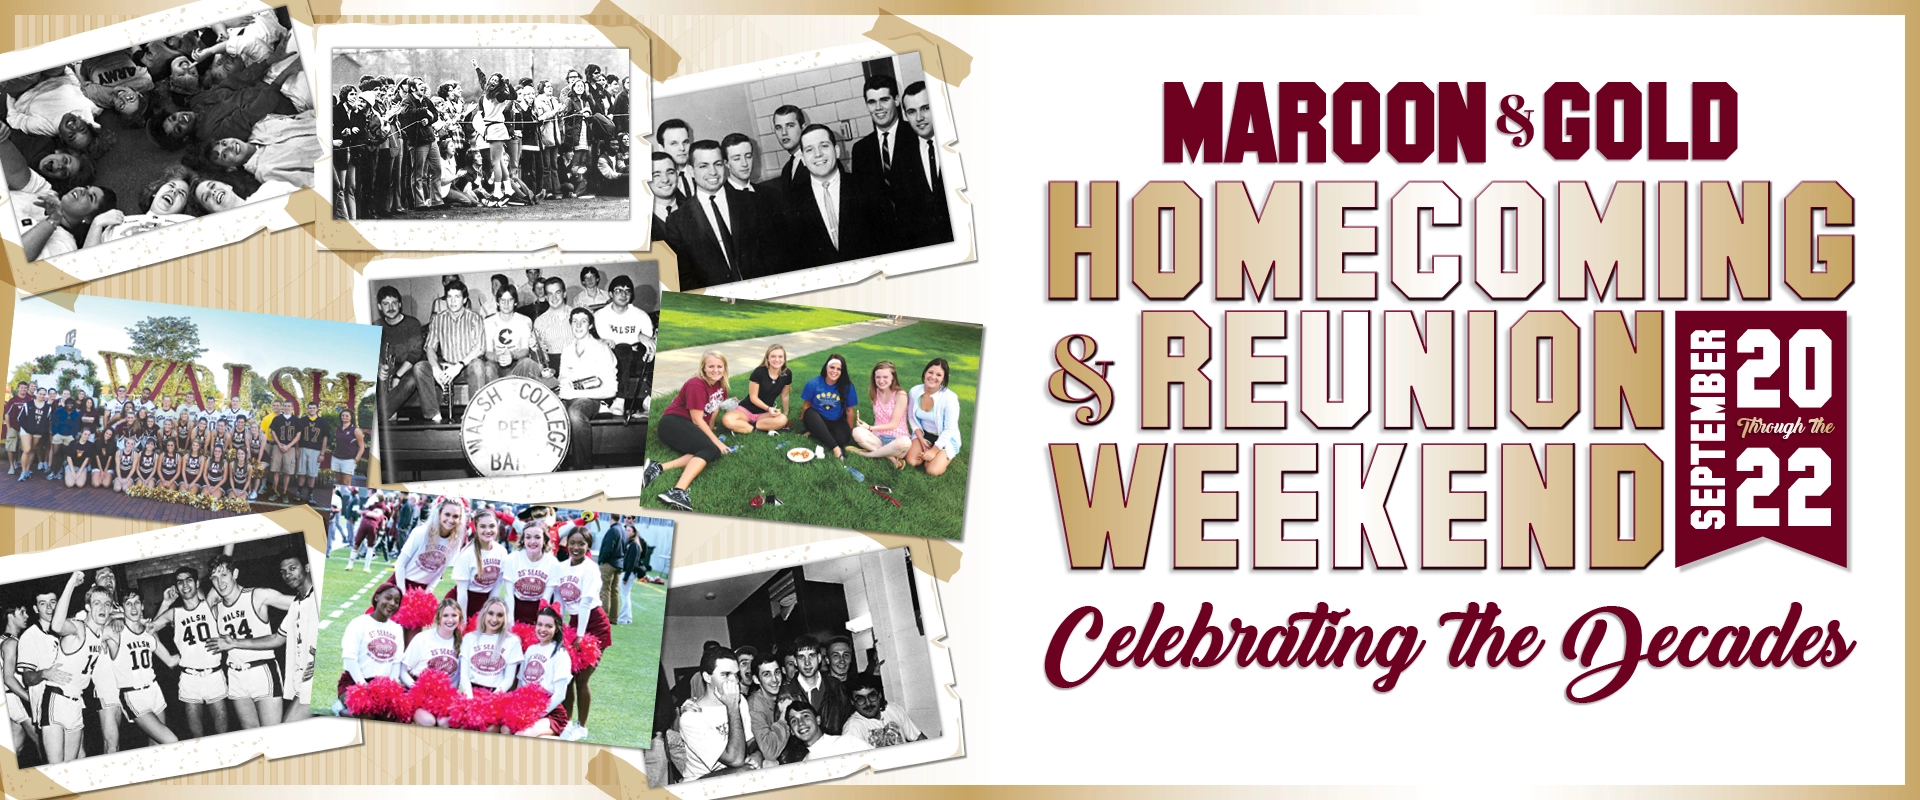 Maroon and Gold Homecoming and Reunion Weekend graphic